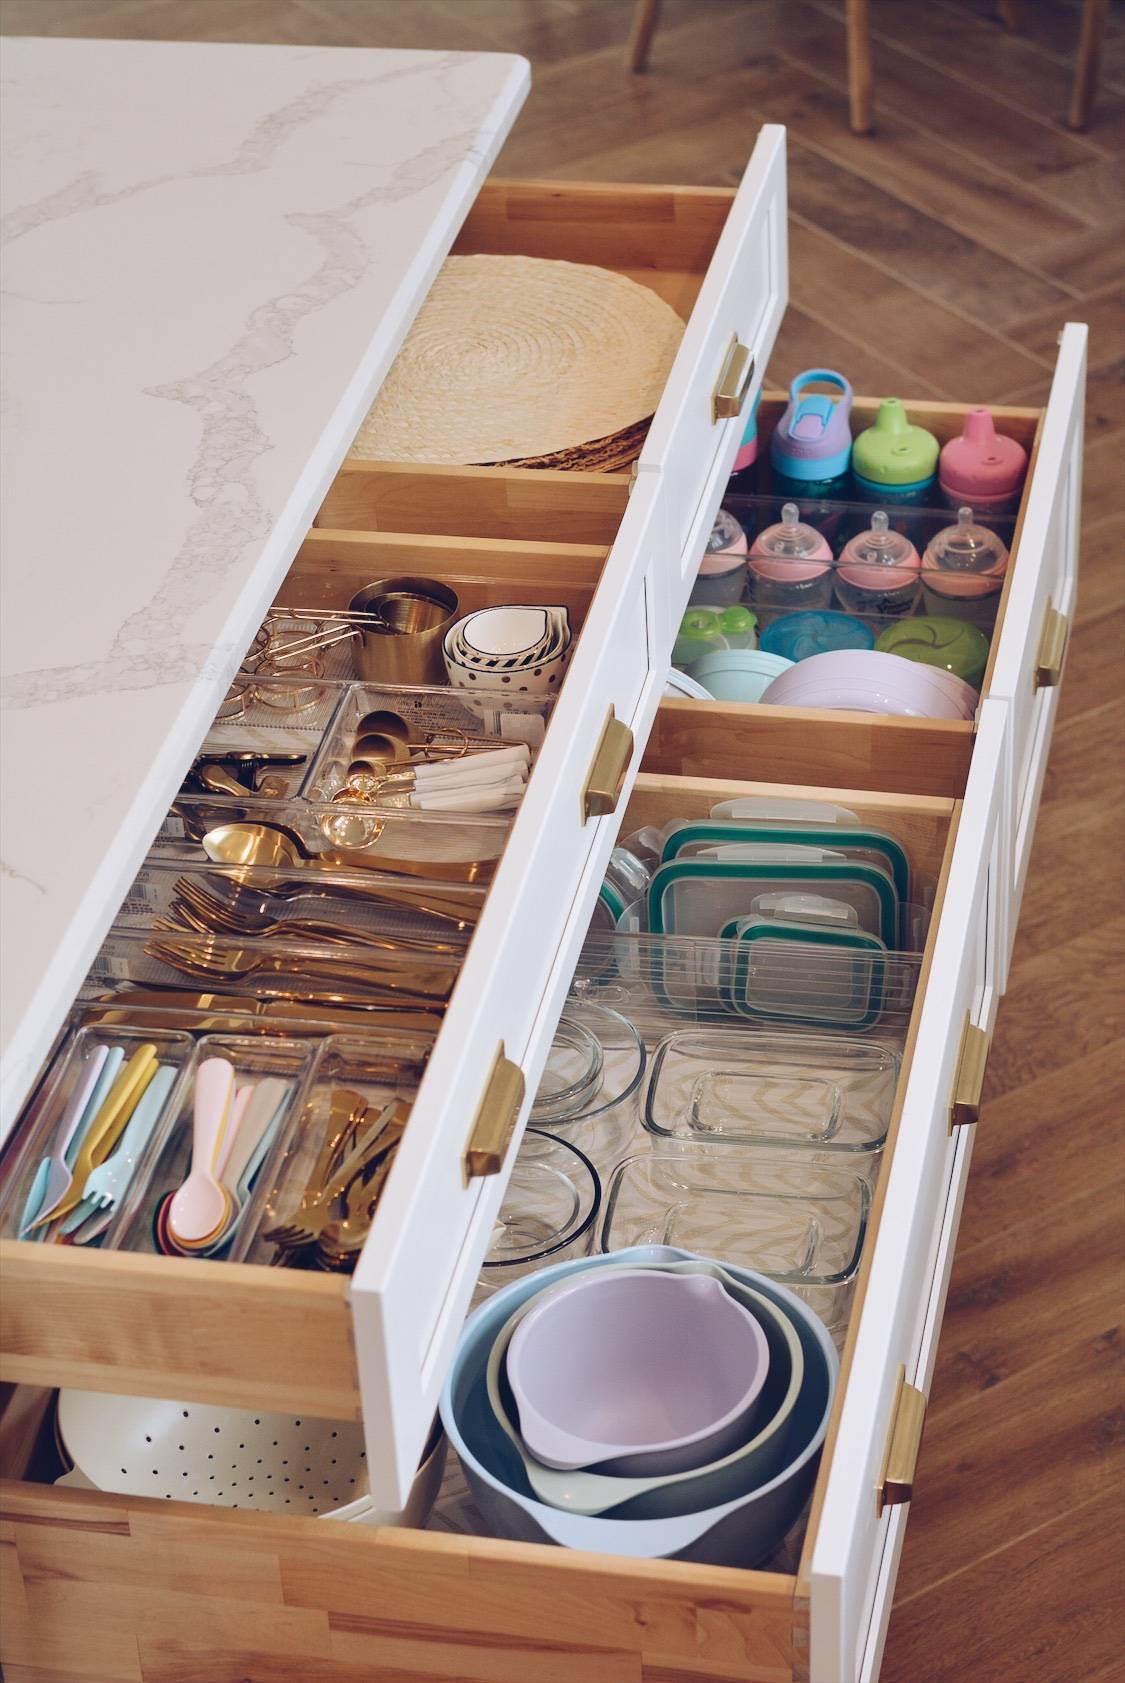 Decluttered and organized kitchen (from The Pink dream)